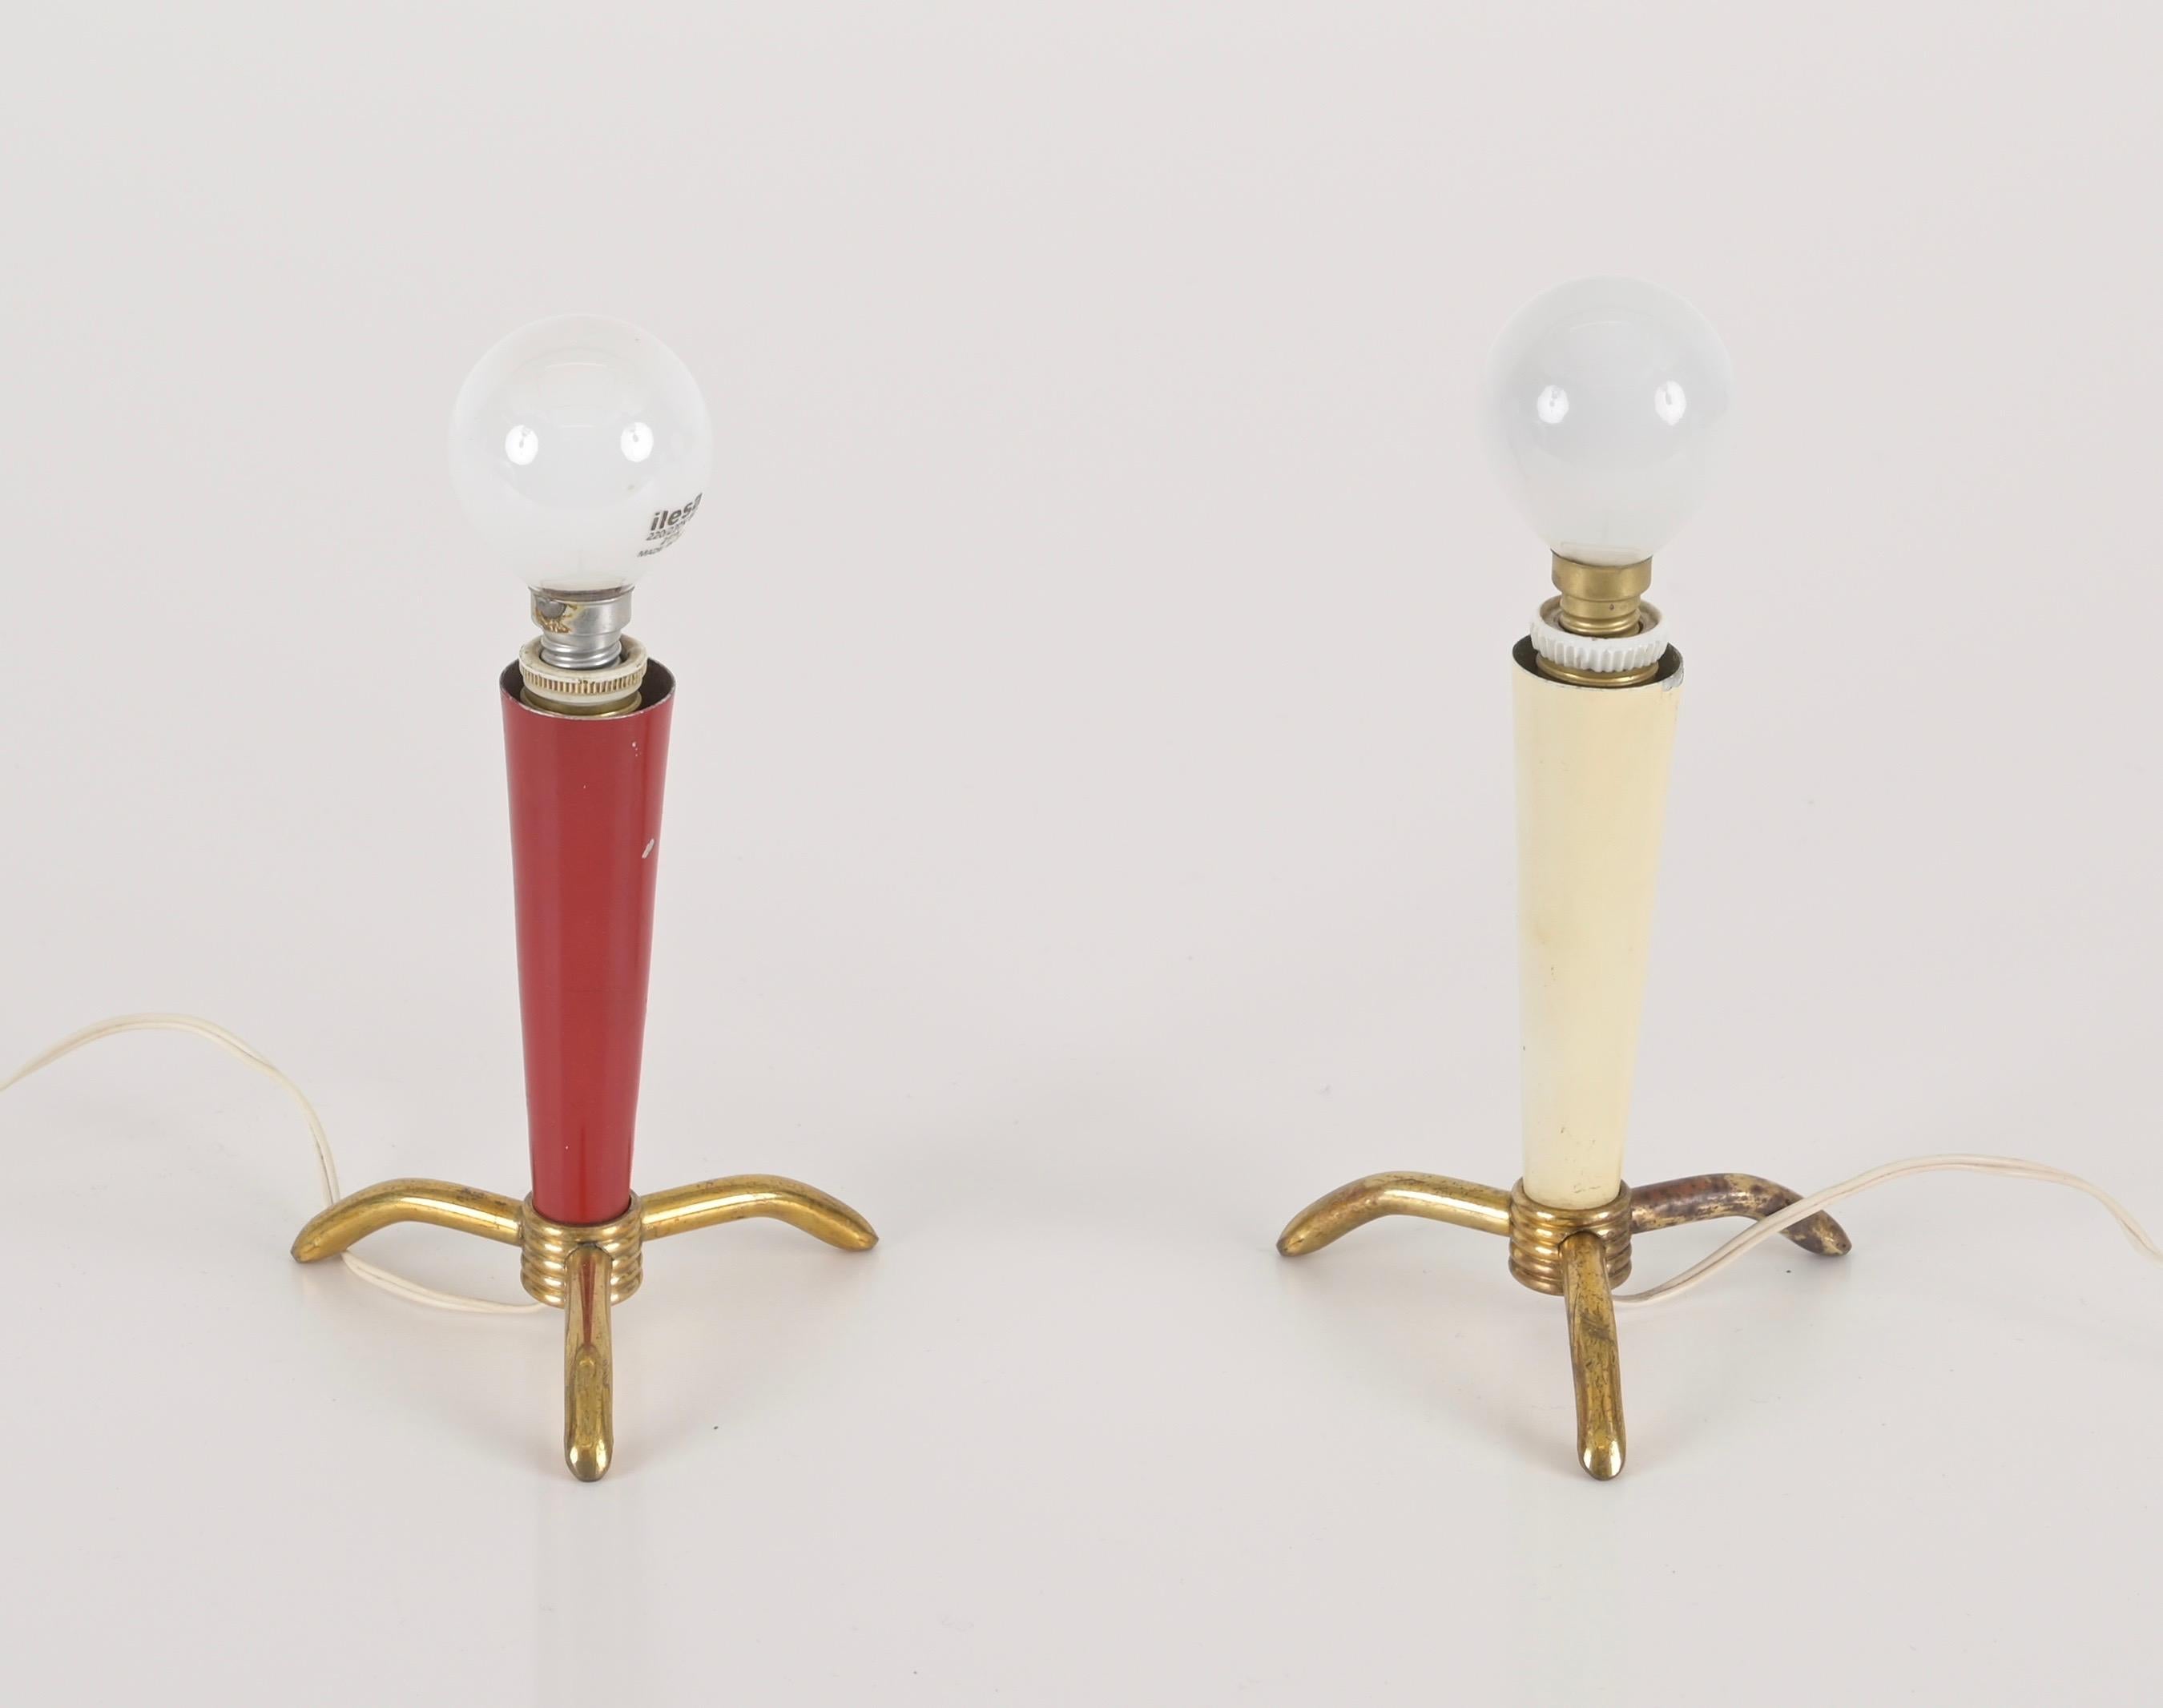 Enameled Pairs of Italian Table Lamps in Brass, Red and Ivory Metal, Stilnovo, 1950s For Sale